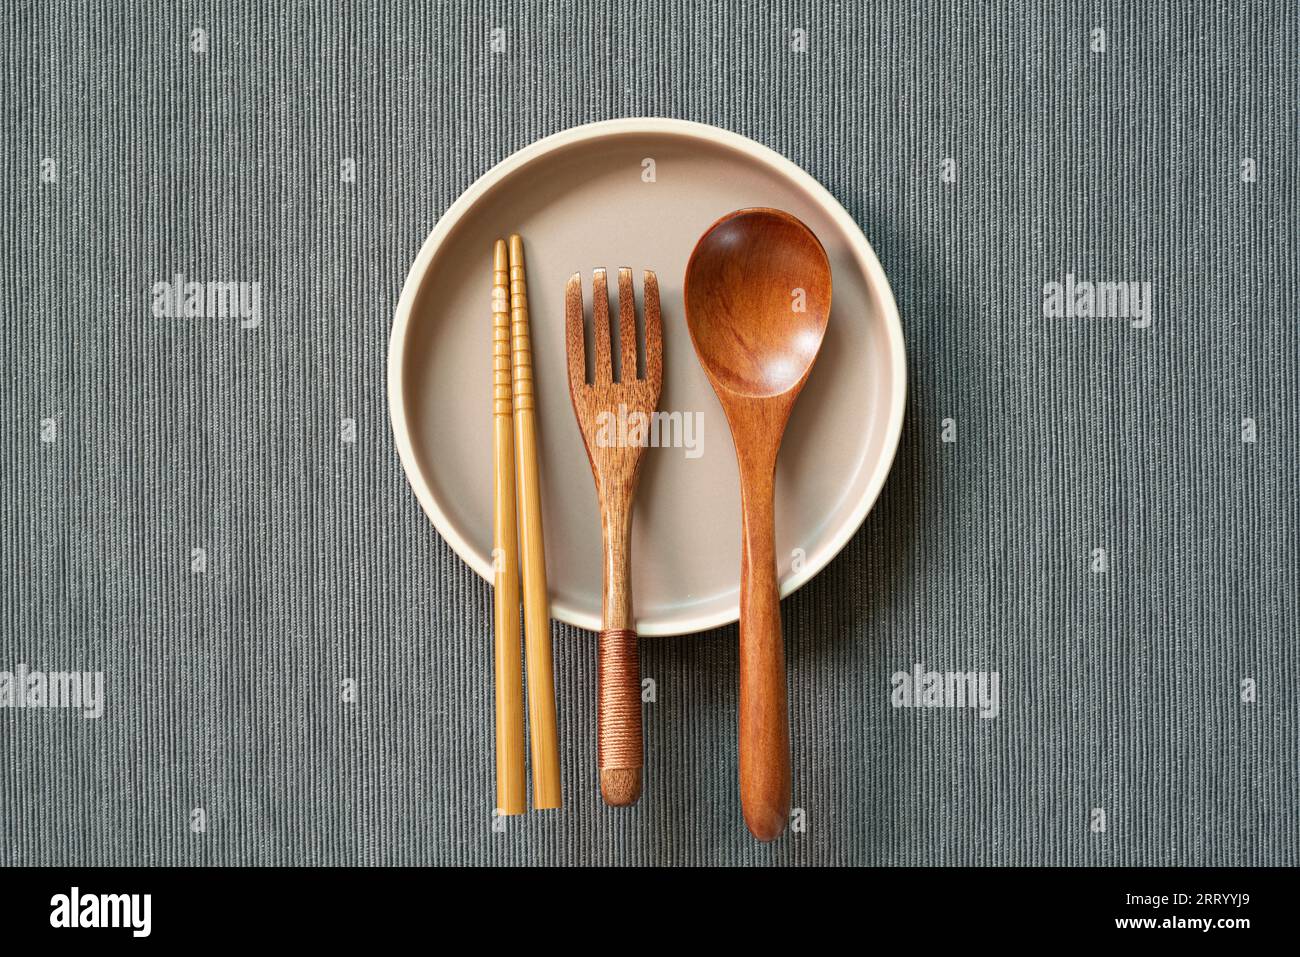 Kitchenware. dish, wooden spoon, fork, chopsticks on gray fabric background. top view, copy space Stock Photo